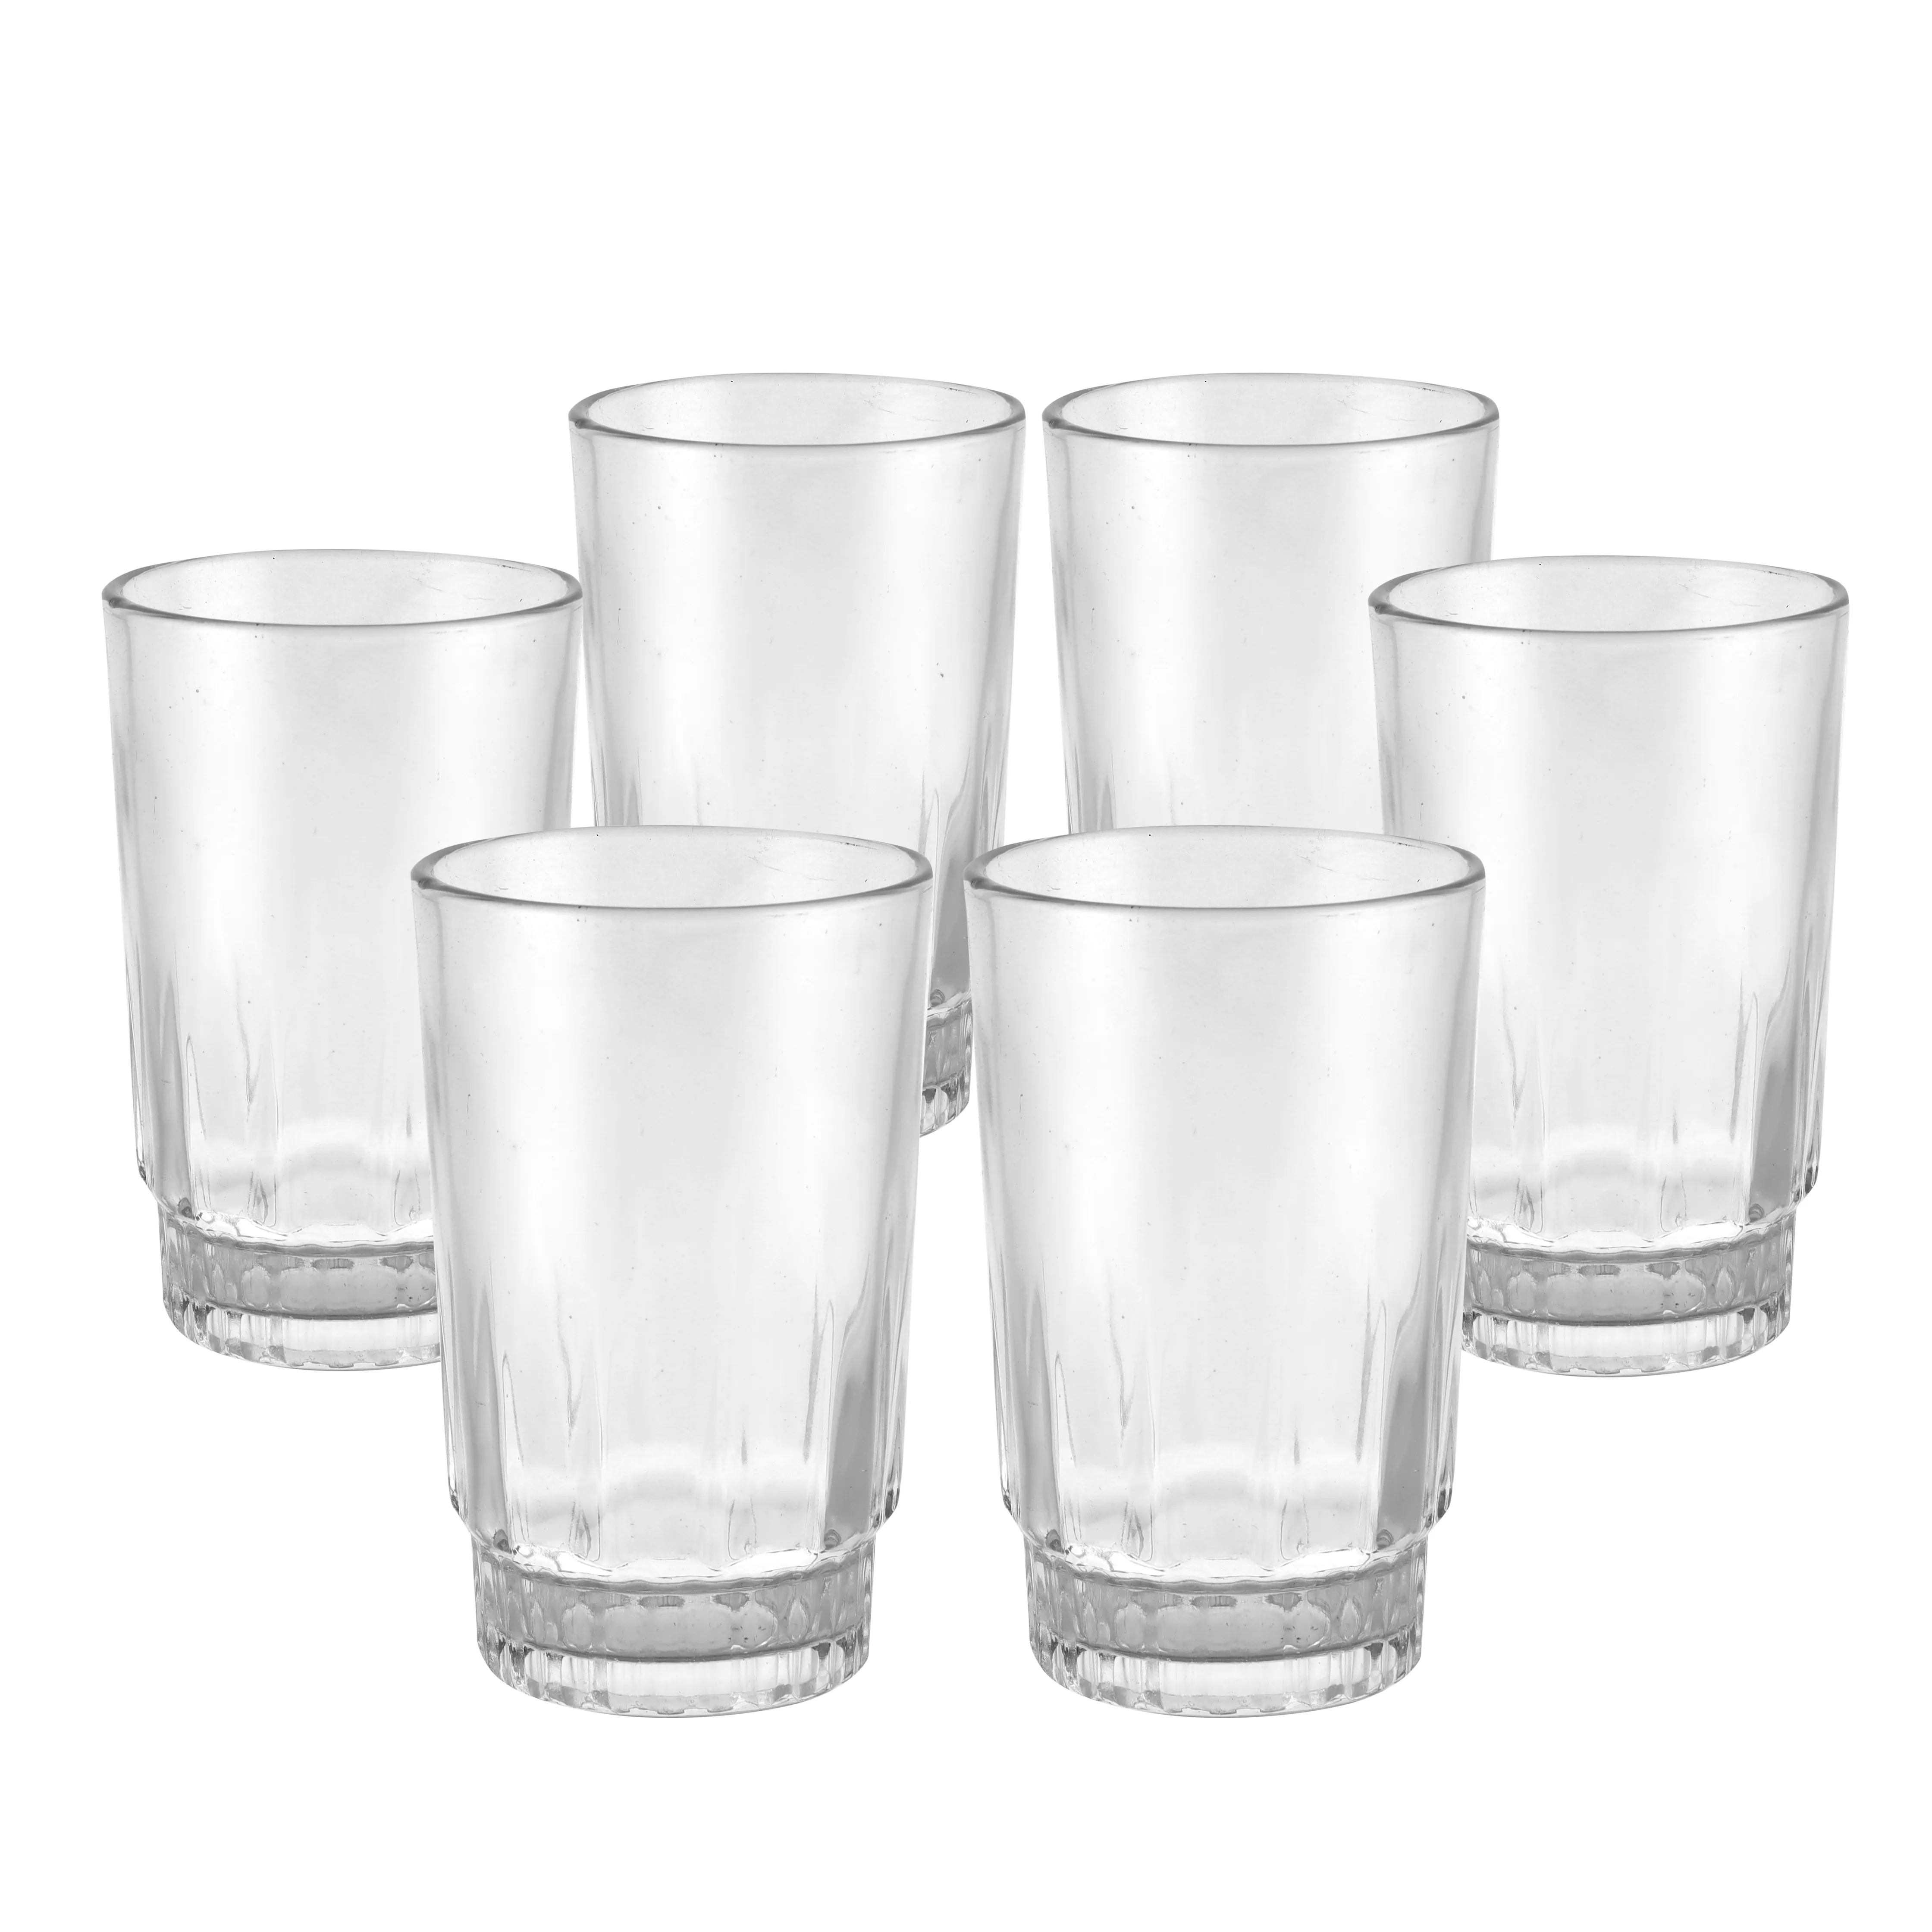 Royalford  RF9818 6Pcs 240ml Glass Tumbler - Portable Water Cup Drinking Glass Lead-Free Dishwasher Safe Ideal for Party Picnic BBQ Camping Garden Ideal for Water Wine Whisky Drinking & More